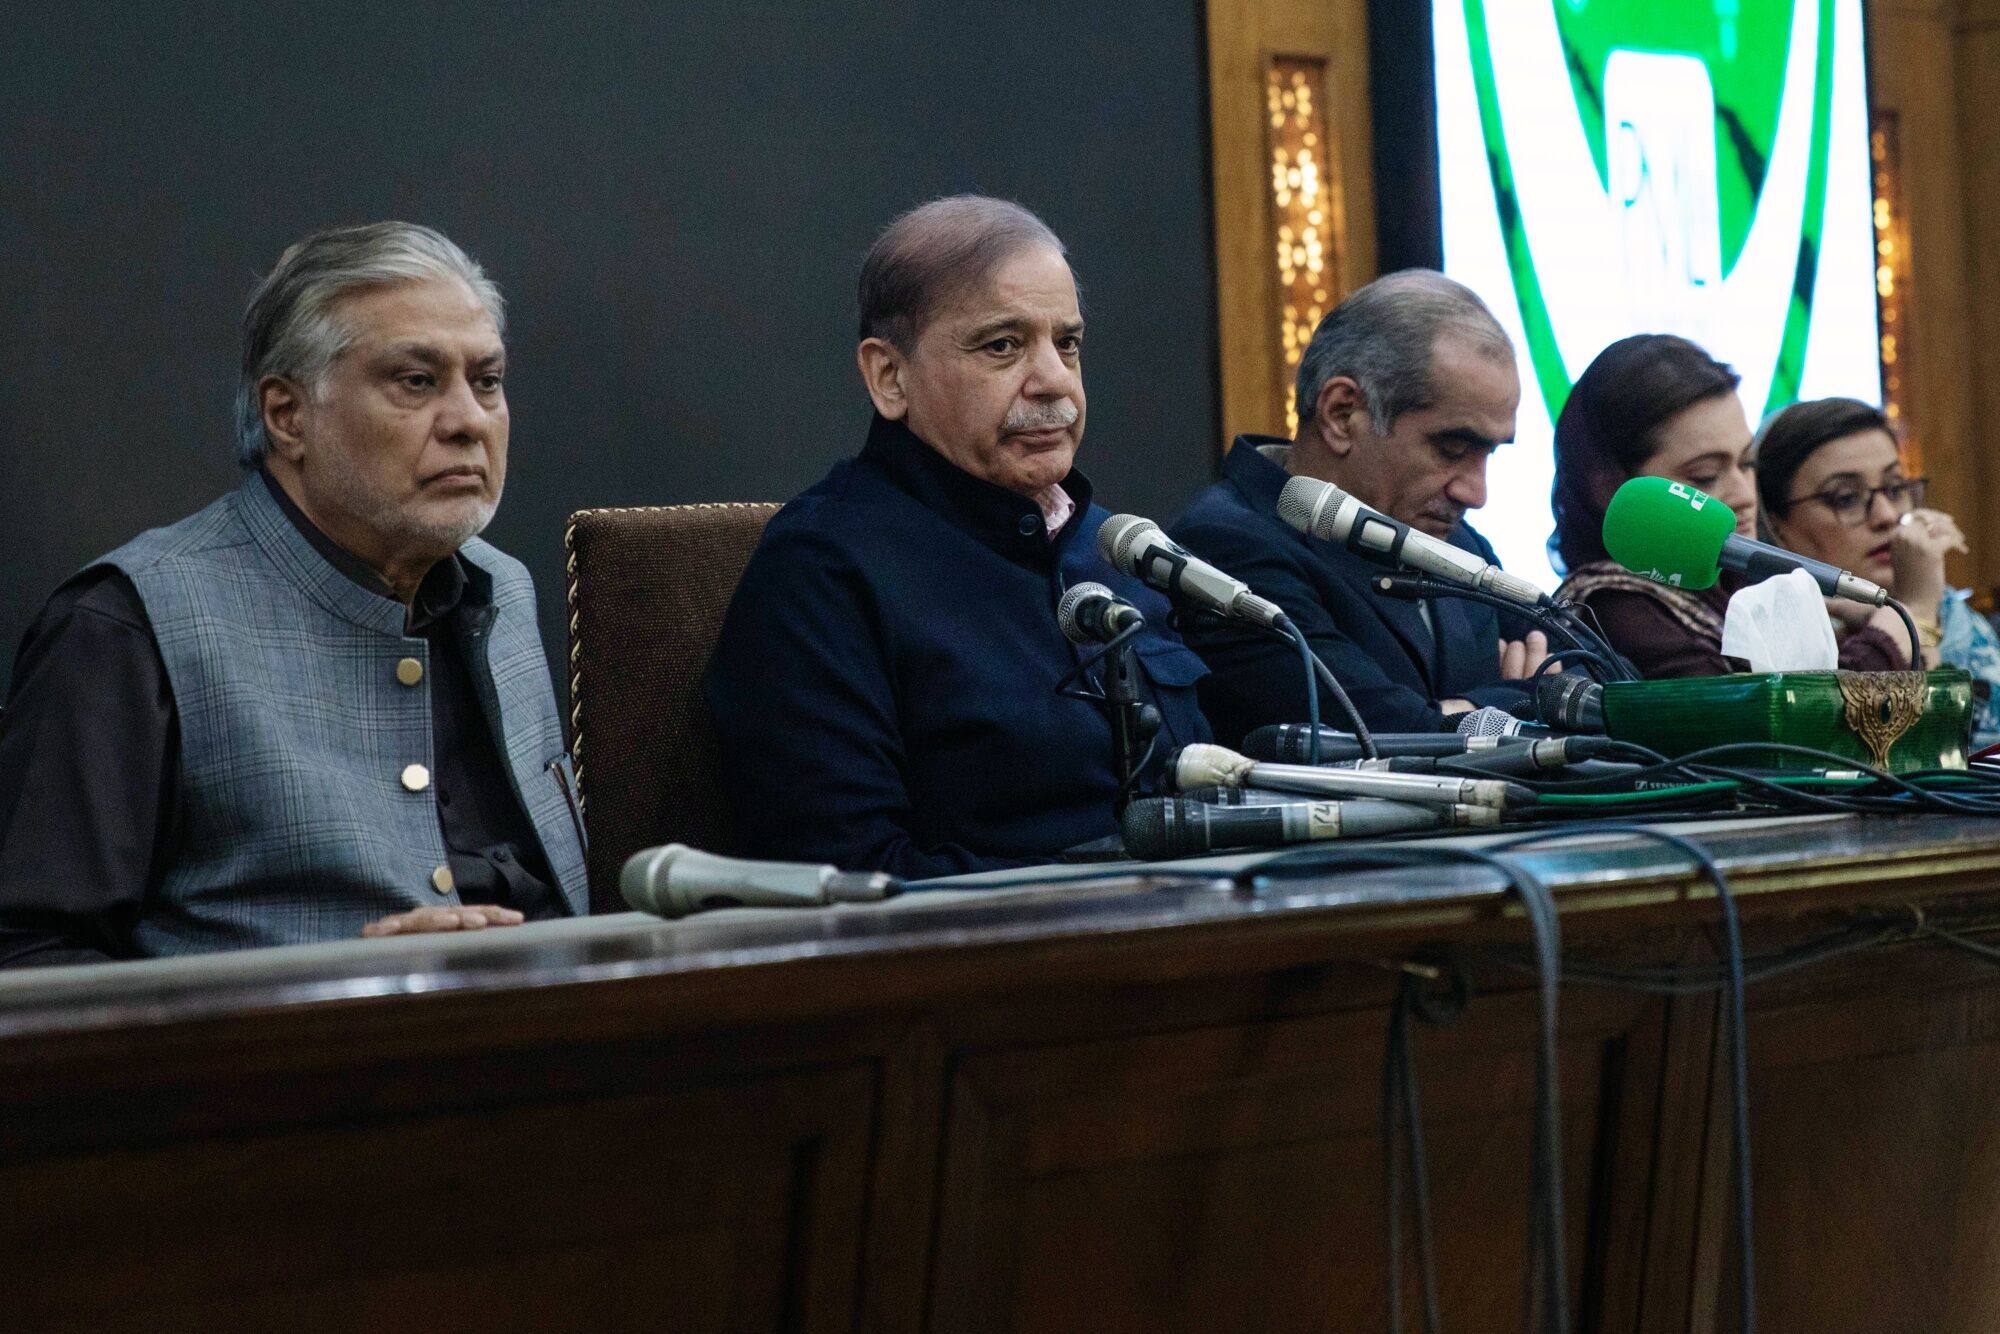 Shehbaz Sharif, Pakistan’s prime minister candidate for the Pakistan Muslim League-N party, (second left) at a news conference in Lahore on February 13. Photo: Bloomberg